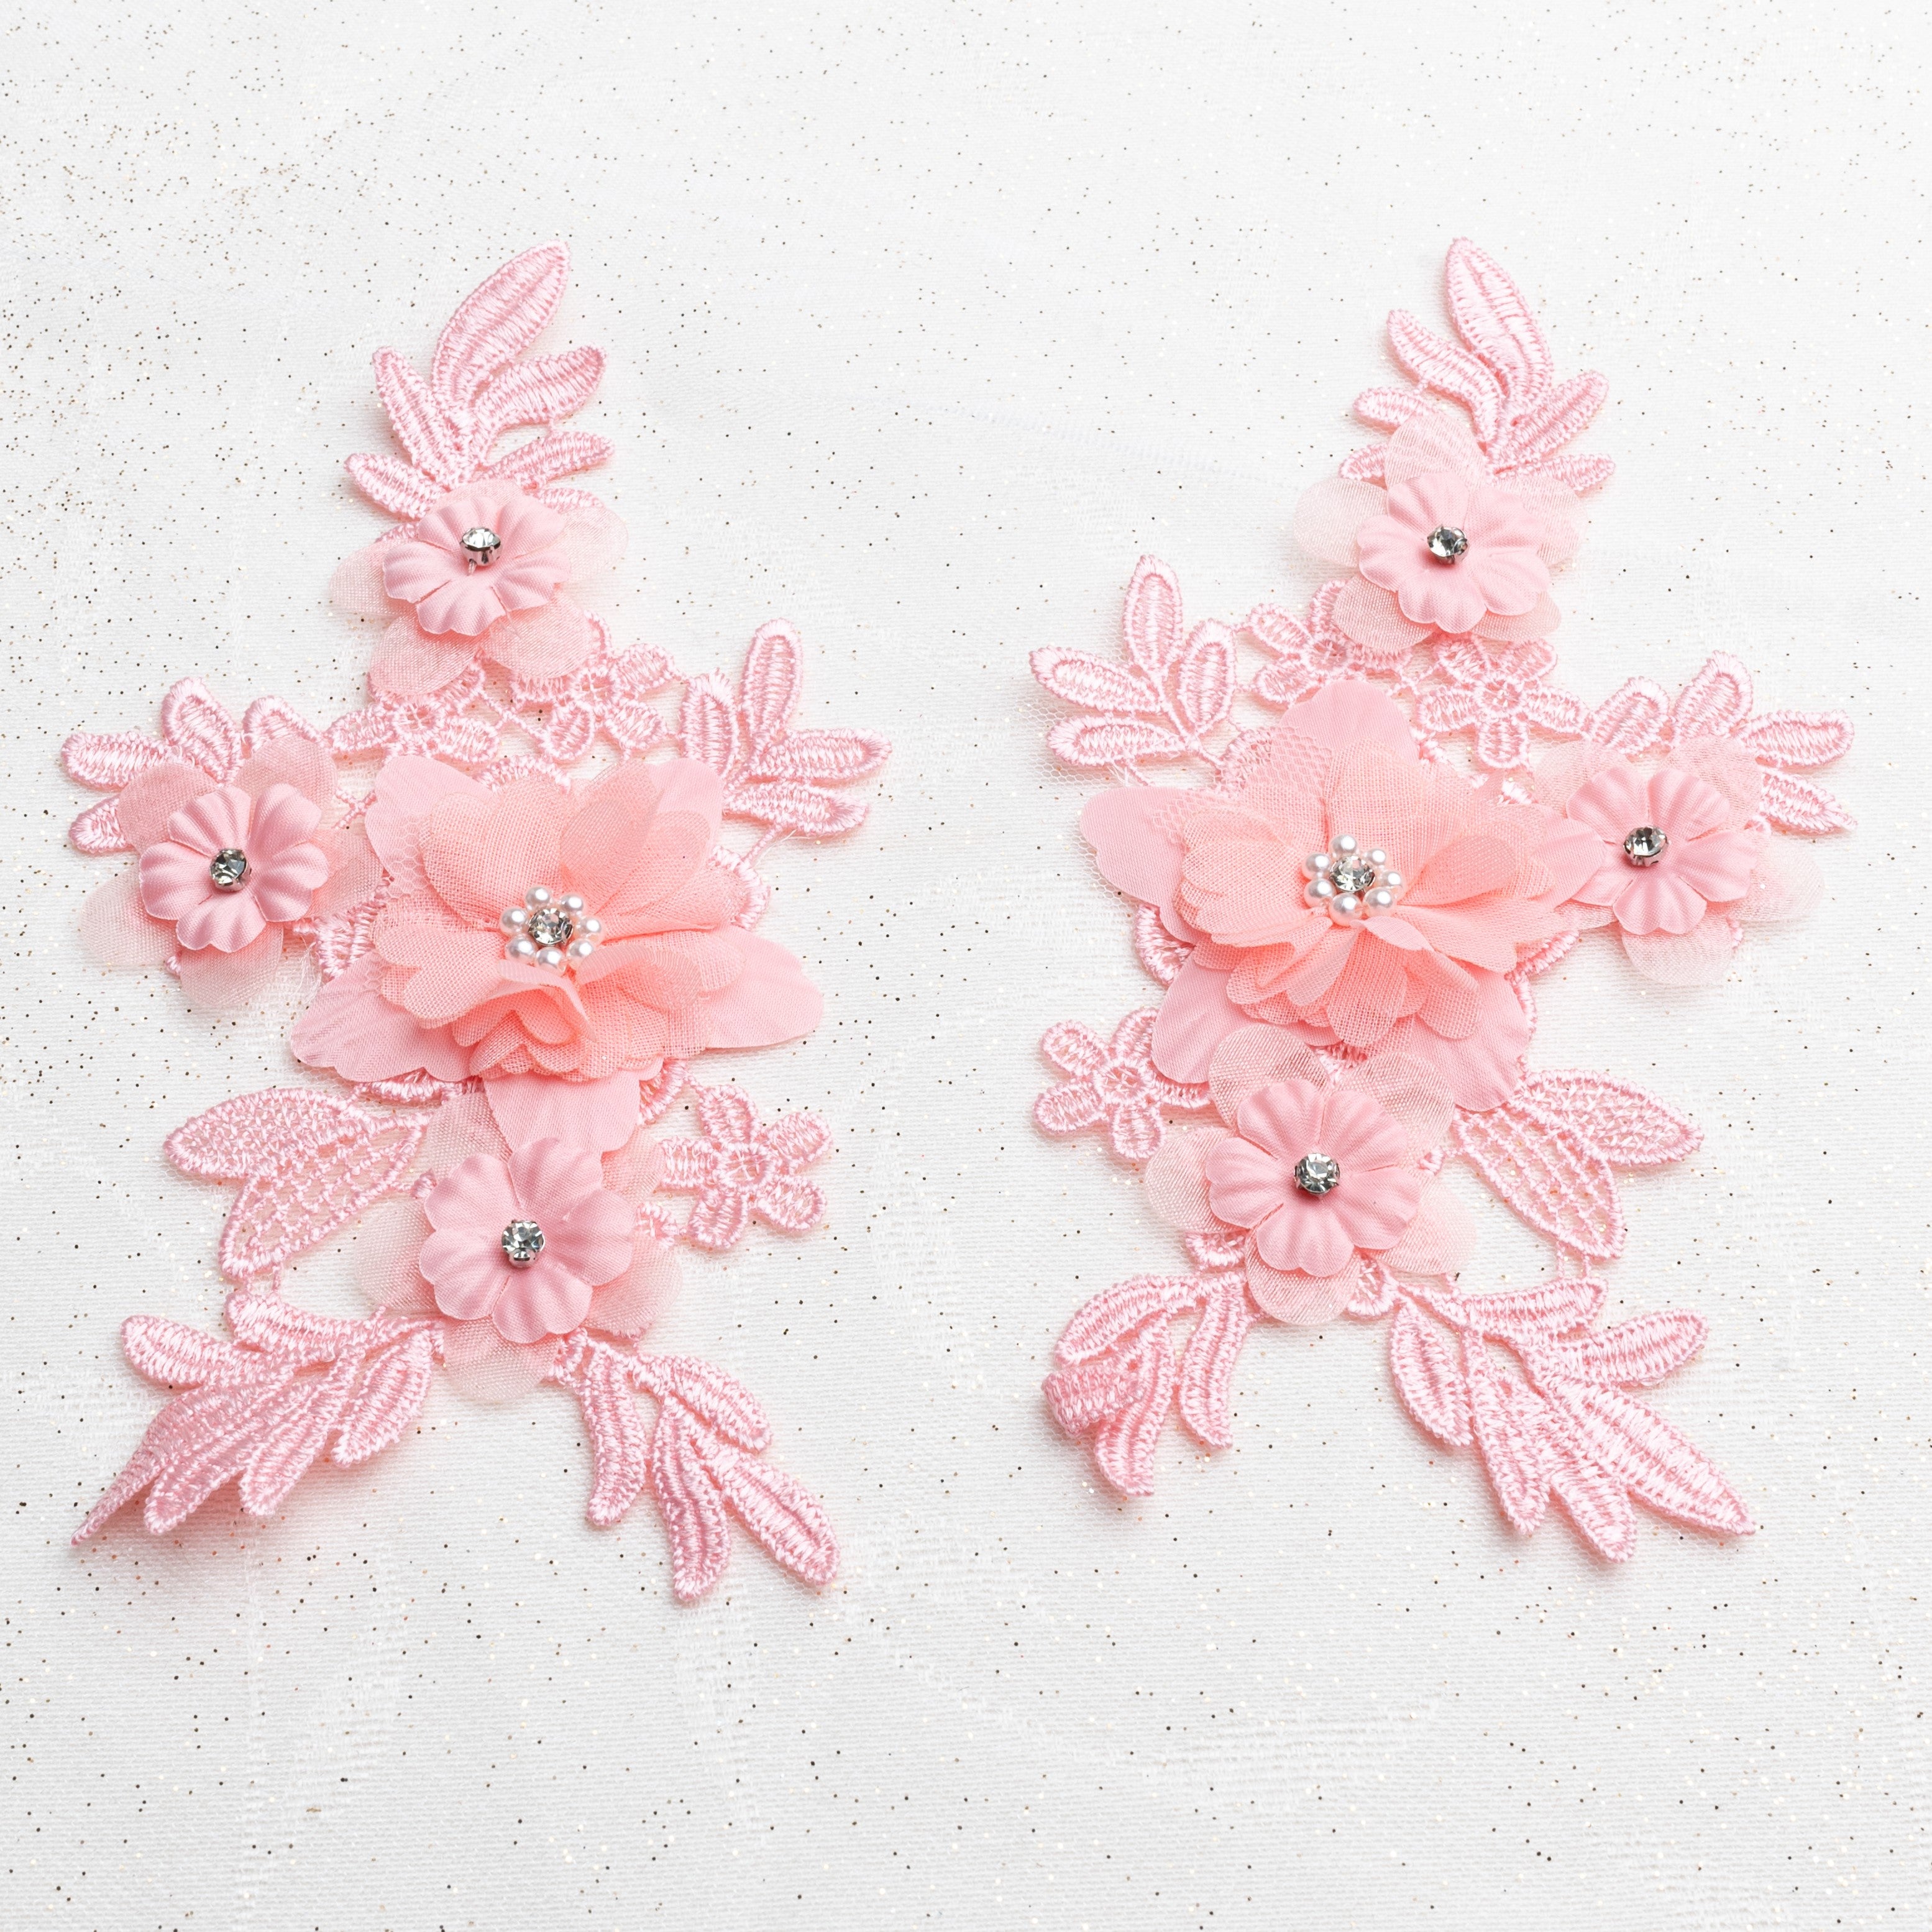 Pink applique pair embellished with 3D organza fabric flowers.  Flowers have a pearl and rhinestone centre.  The flowers are laying flat on a white background.